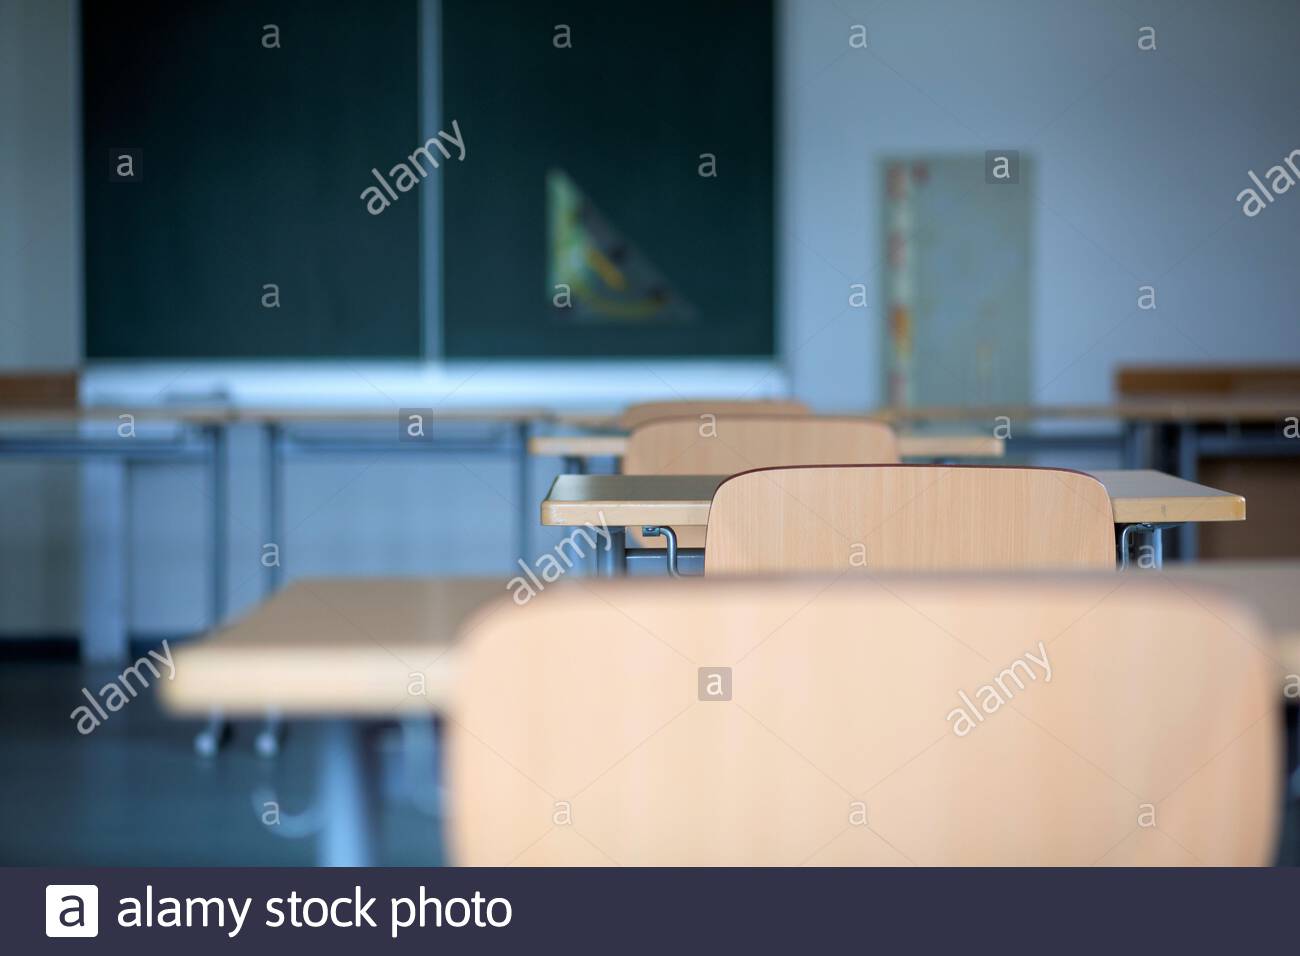 School desks and chairs in an empty classroom in Germany as the corona crisis continues to hit education hard. Stock Photo